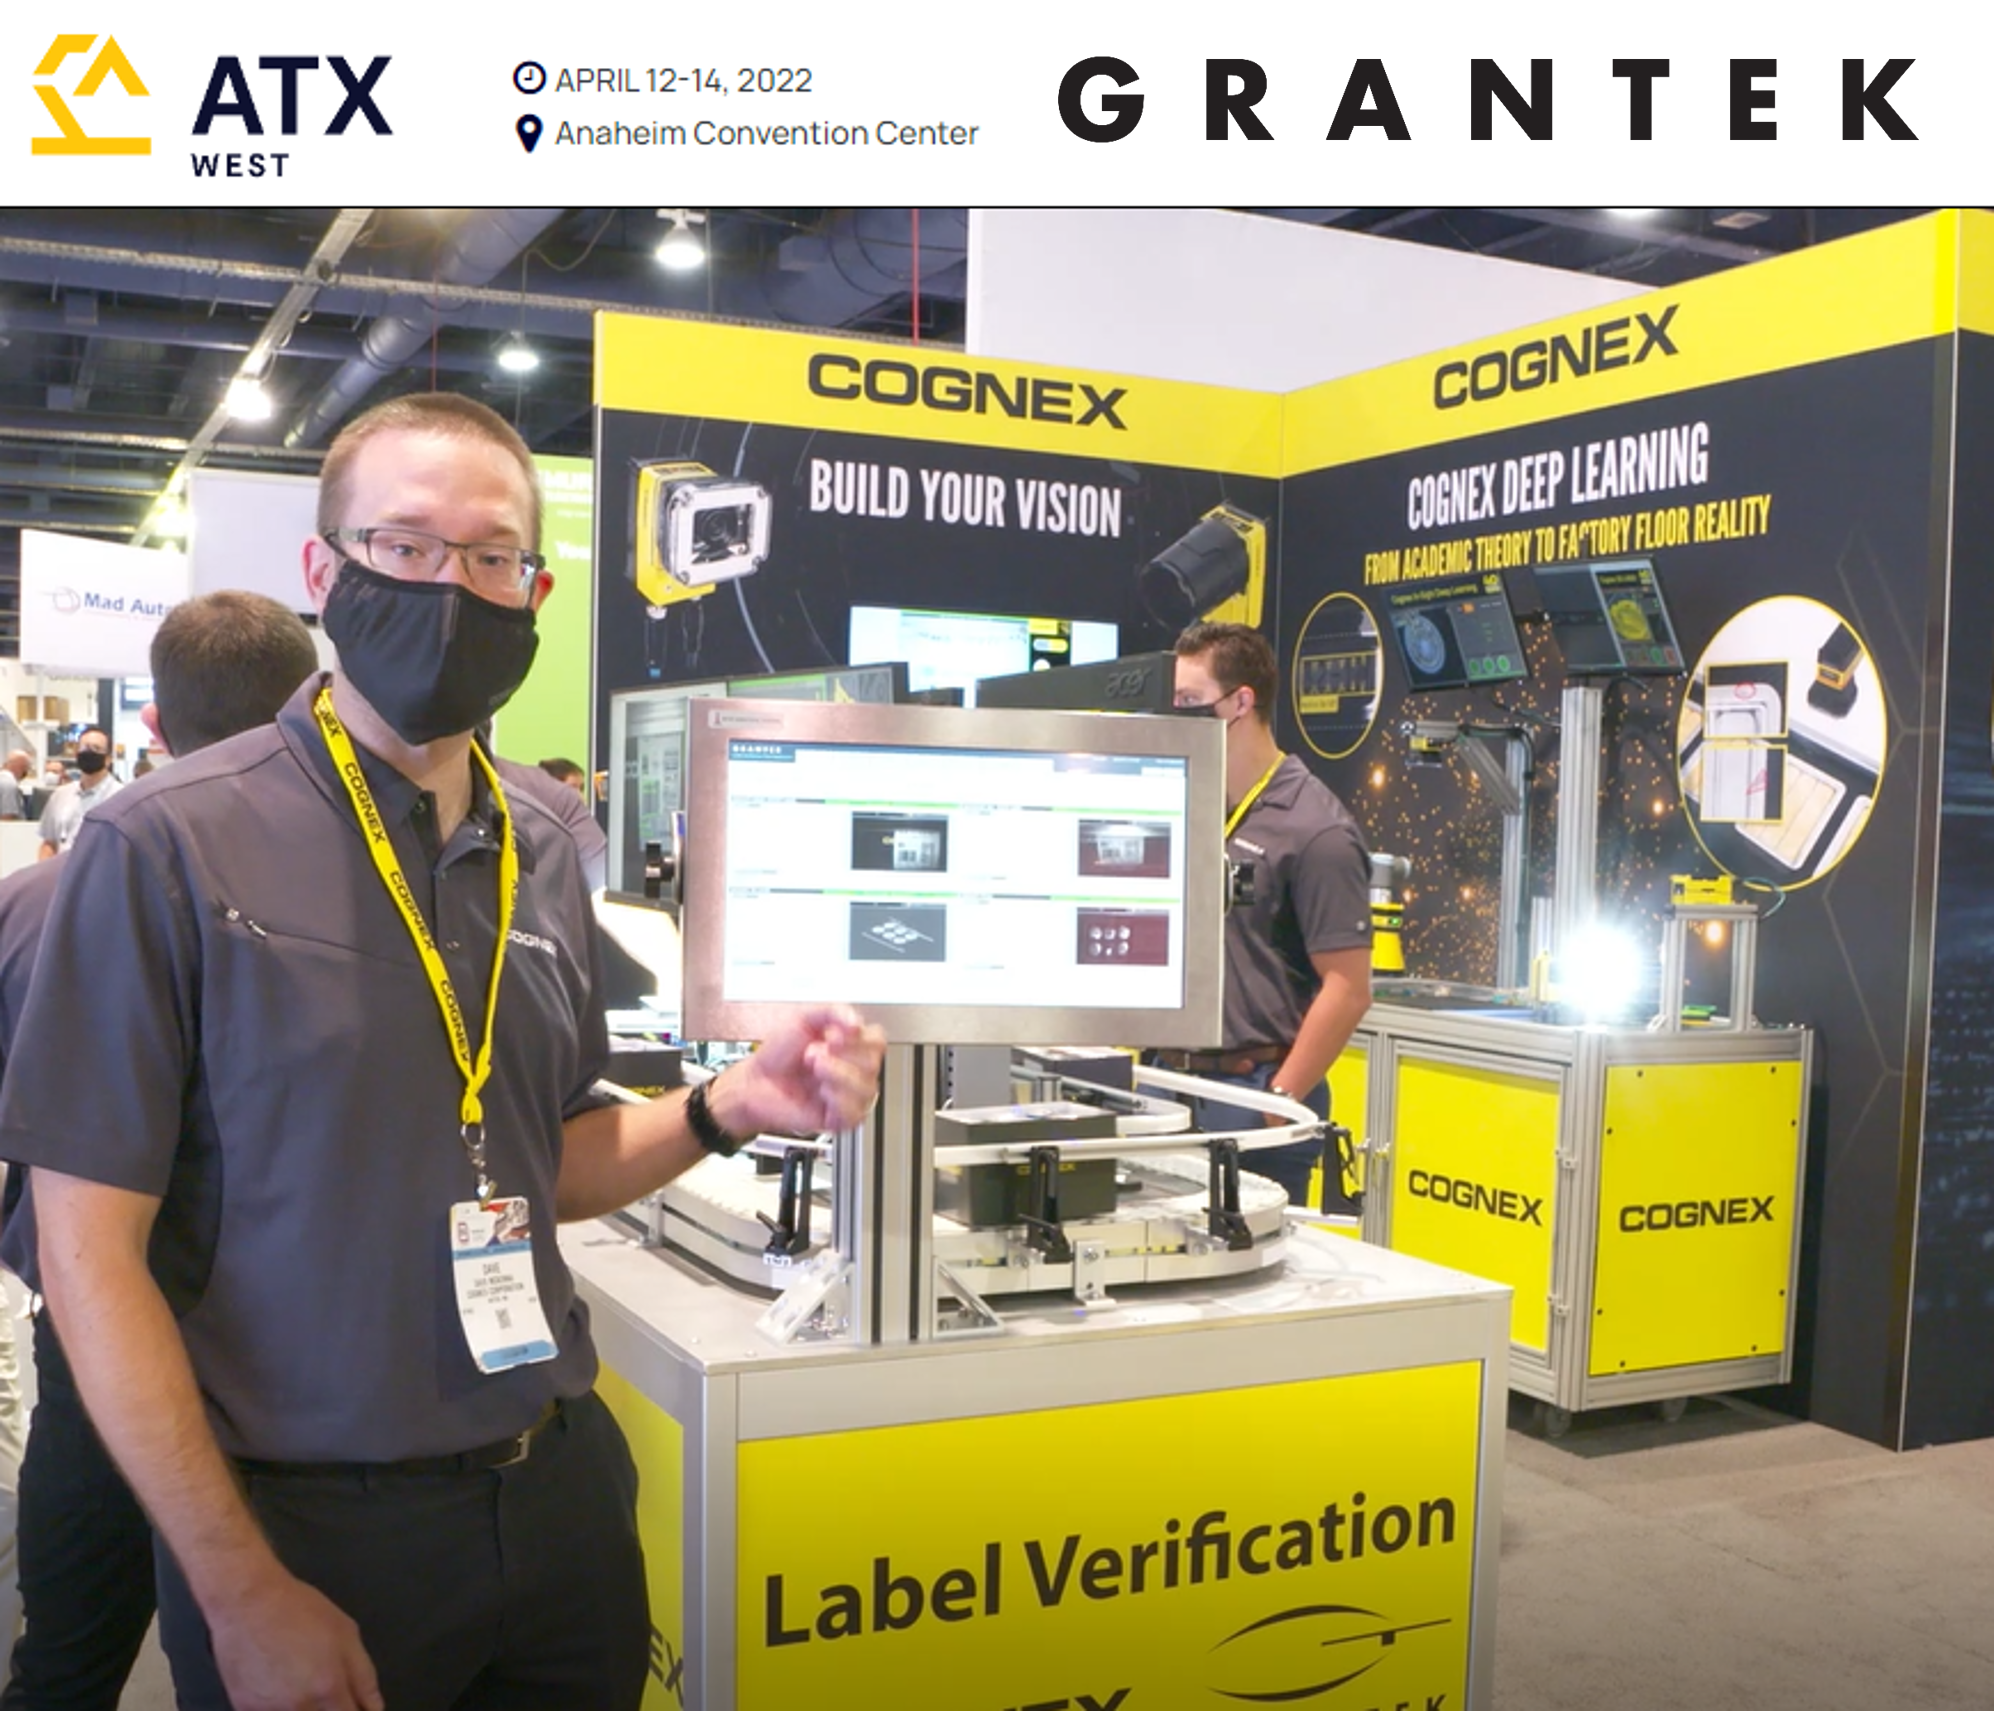 Grantek to Exhibit at ATX West 2022 in Anaheim with Cognex